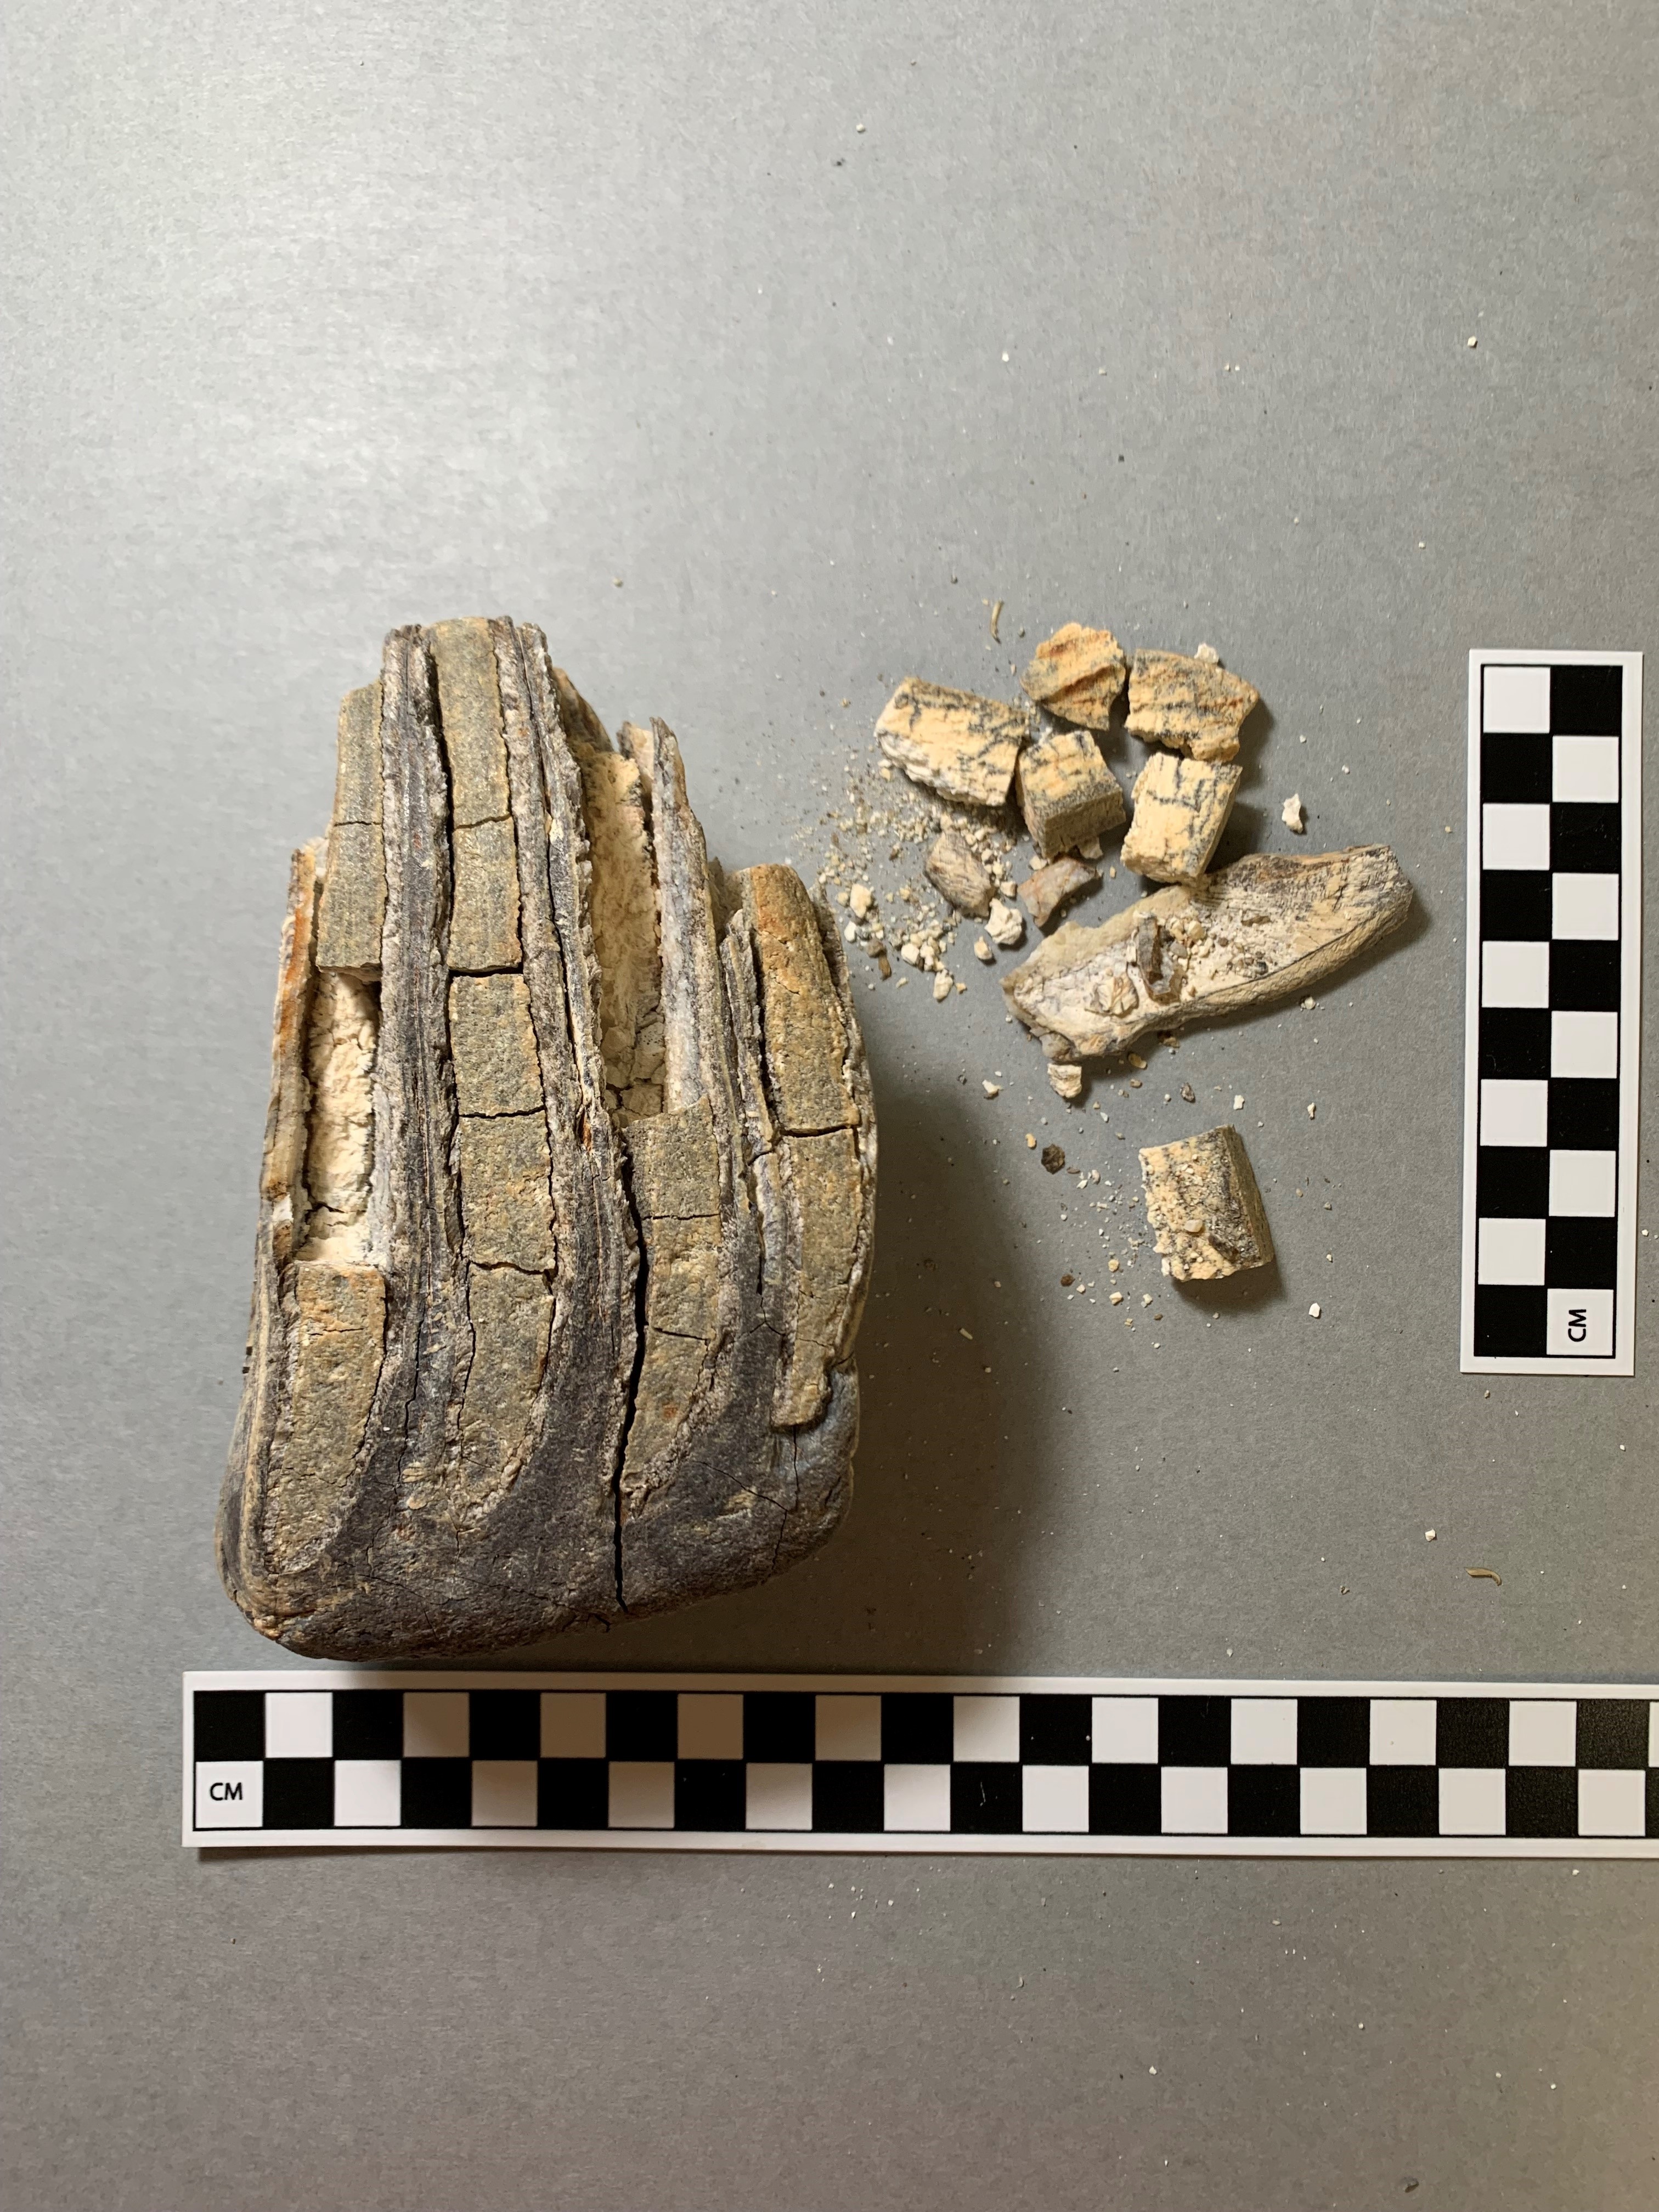 Mammoth tooth fragments